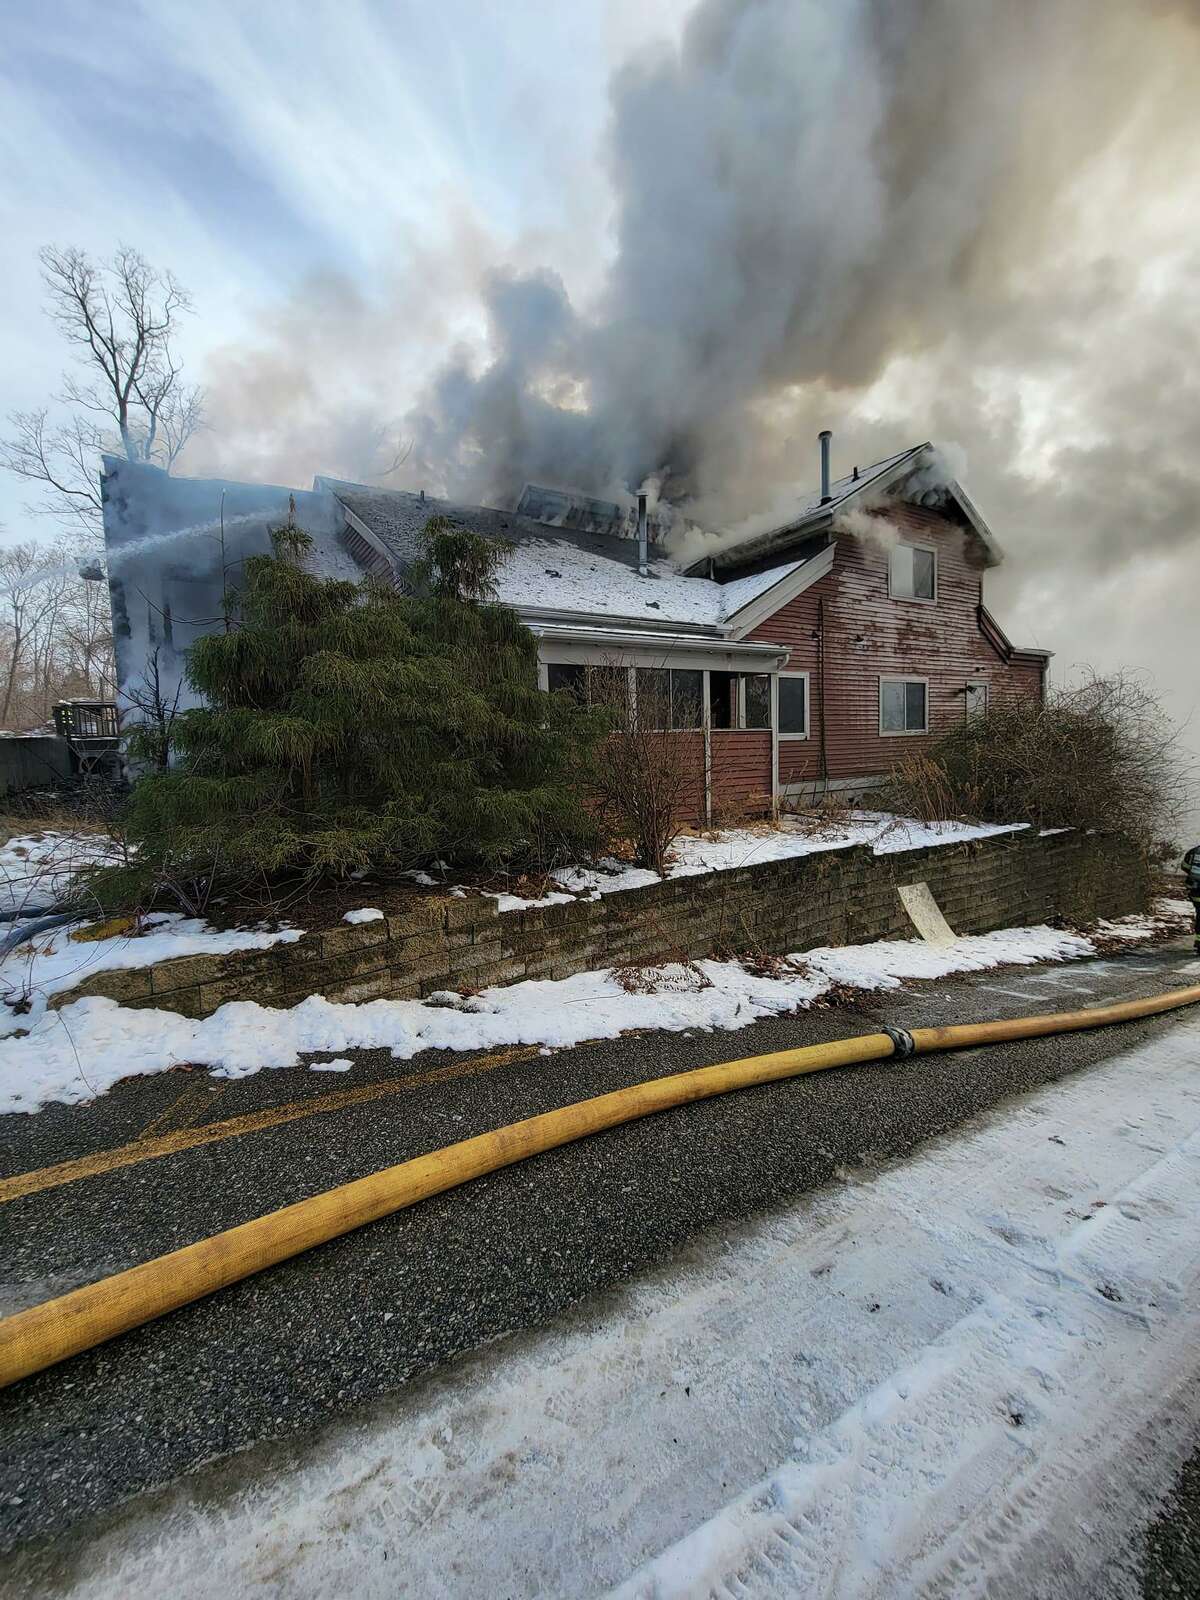 The Newtown Hook & Ladder, along with four other Newtown fire departments, were called to a fire at a vacant commercial building on Mount Pleasant Road around 9:30 a.m. Friday. Fire officials said the building, which was a former restaurant and pub, was completely destroyed.